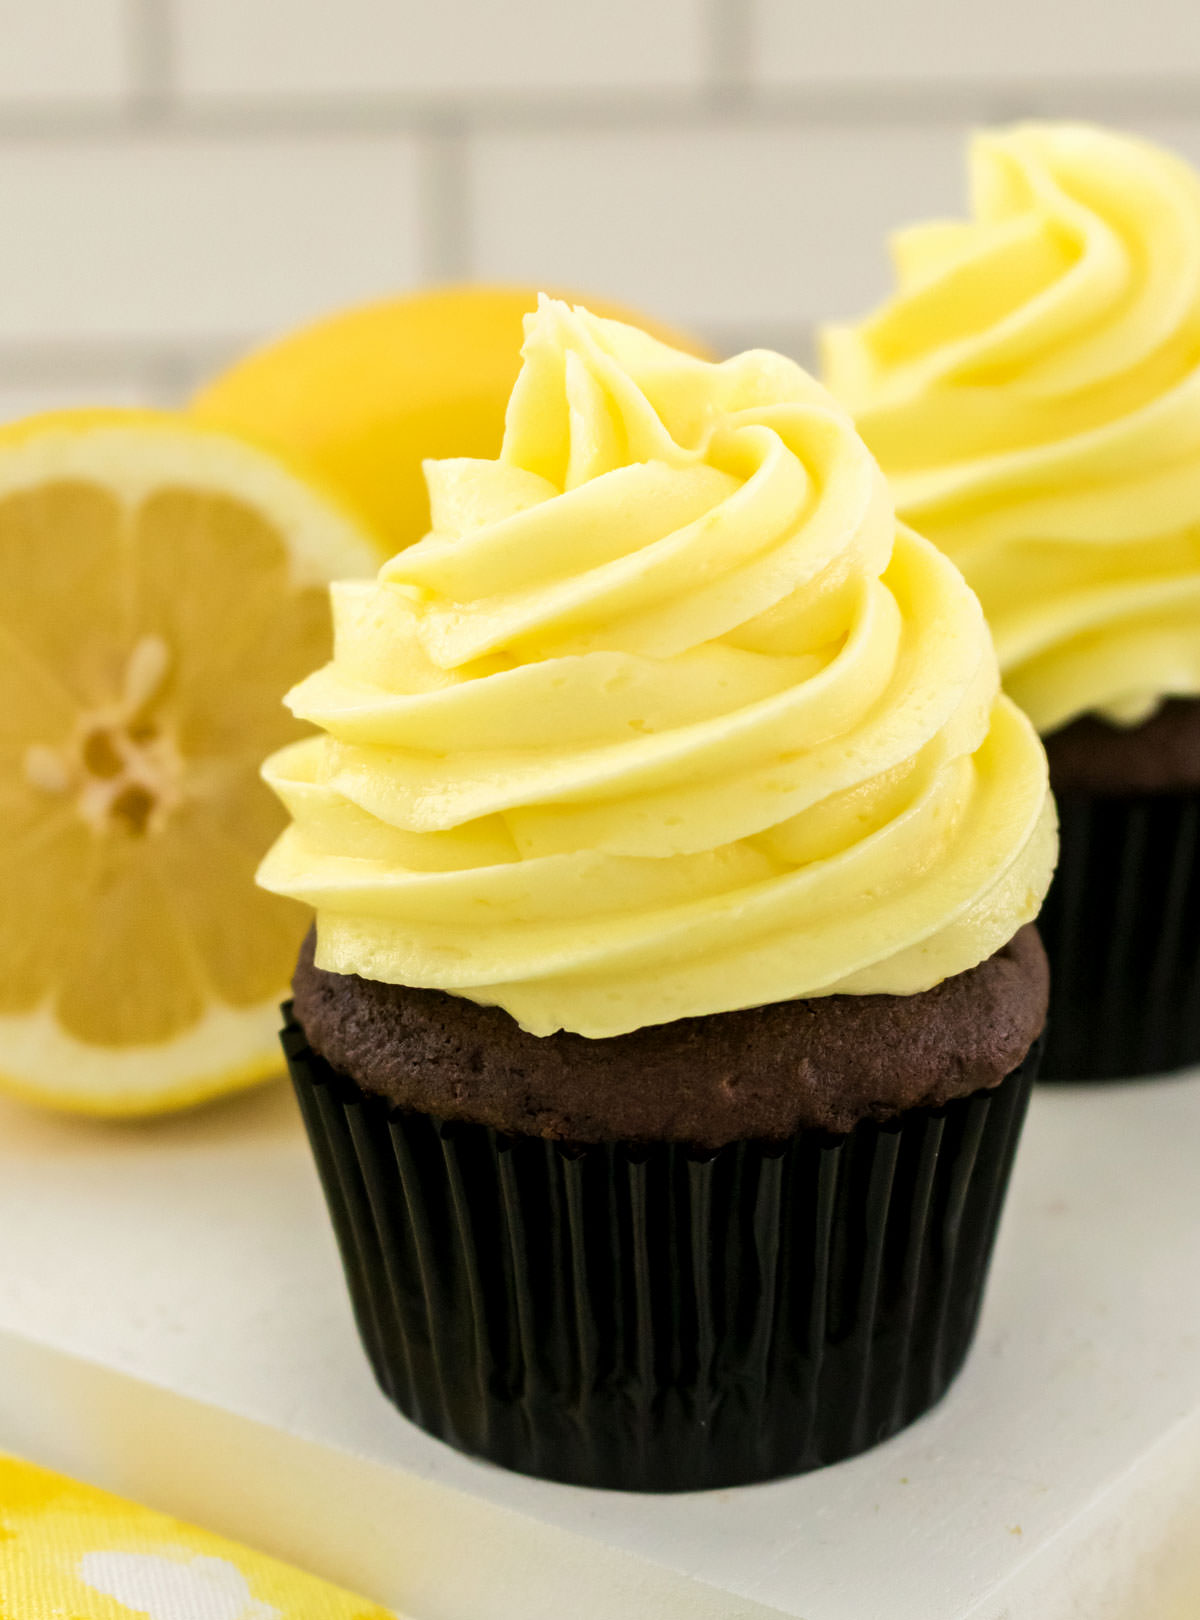 Closeup on a chocolate cupcake topped with The Best Lemon Buttercream Frosting sitting on a white platter next to a fresh lemon.